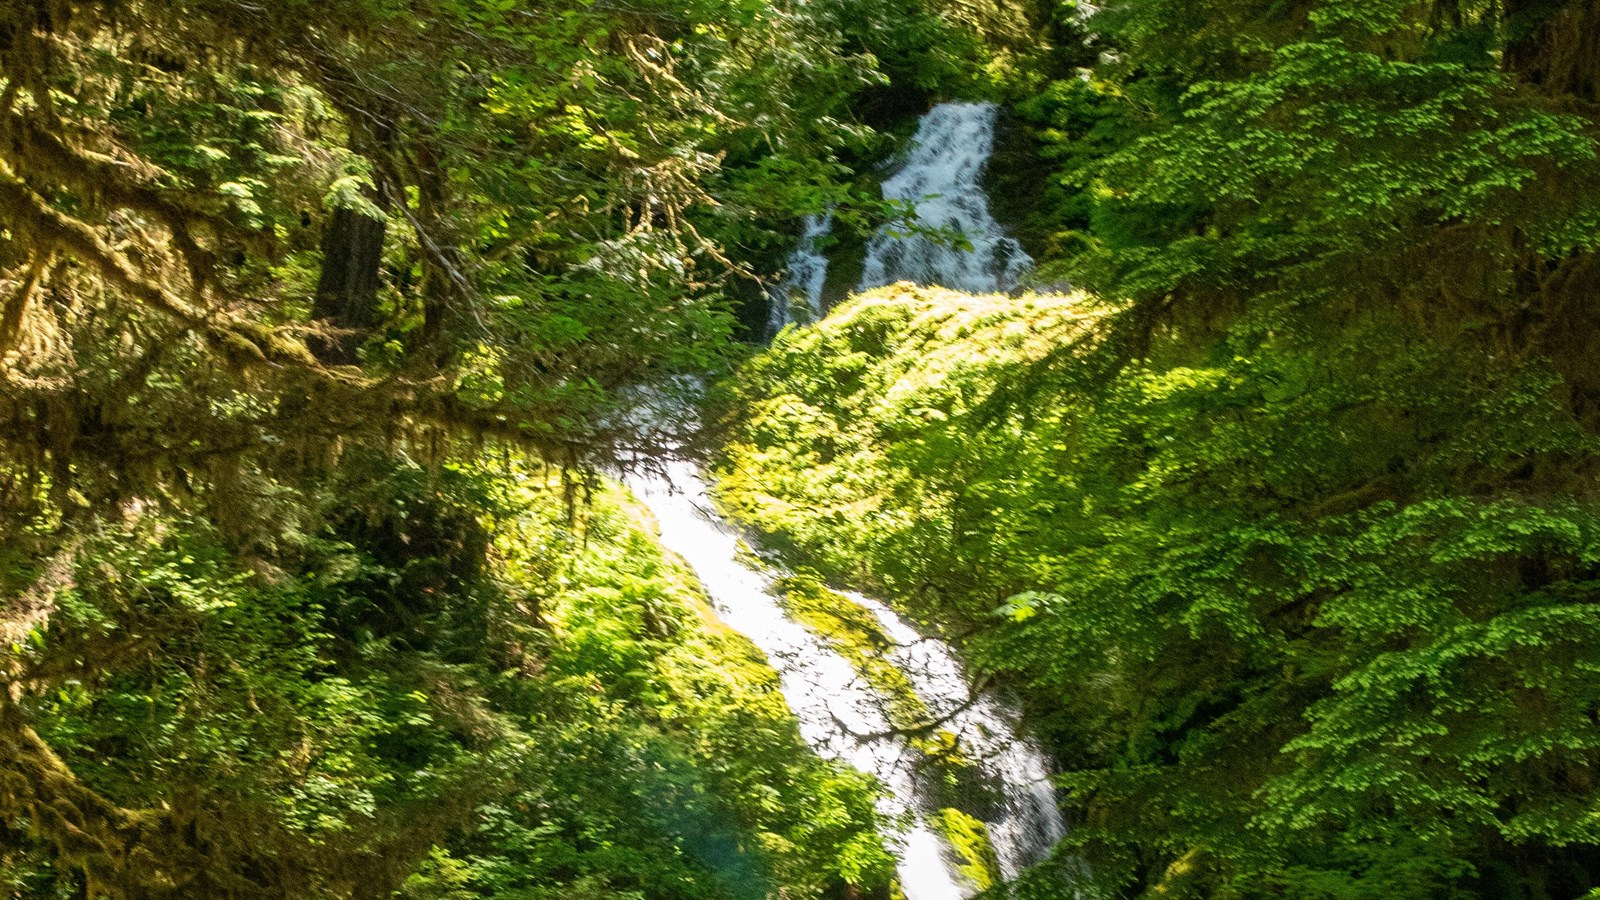 A waterfall in a leafy forest